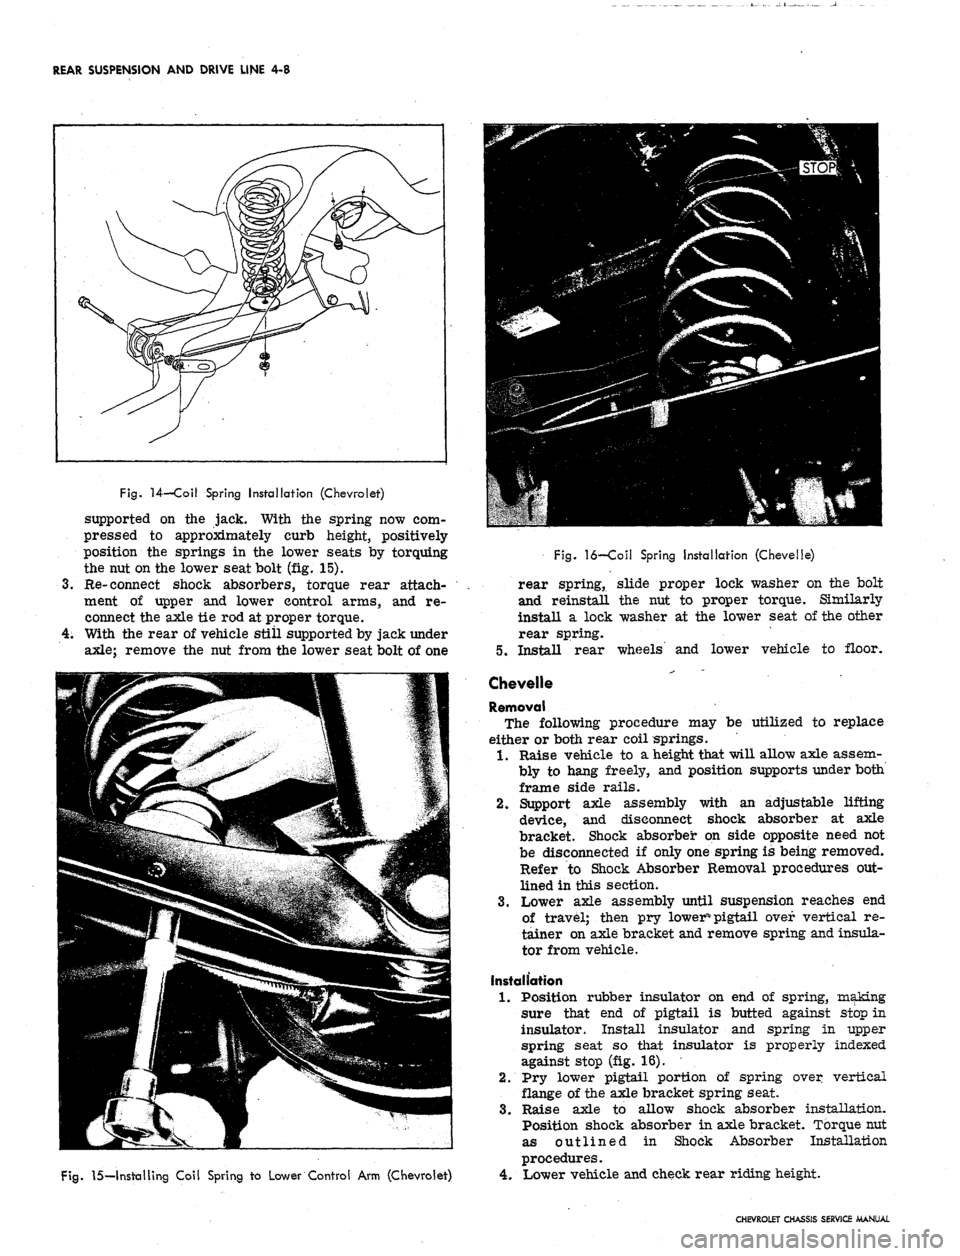 CHEVROLET CAMARO 1967 1.G Chassis Service Manual 
REAR SUSPENSION AND DRIVE LINE 4-8

Fig.
 14—Coil Spring Installation (Chevrolet)

supported on the jack. With the spring now com-

pressed to approximately curb height, positively

position the sp